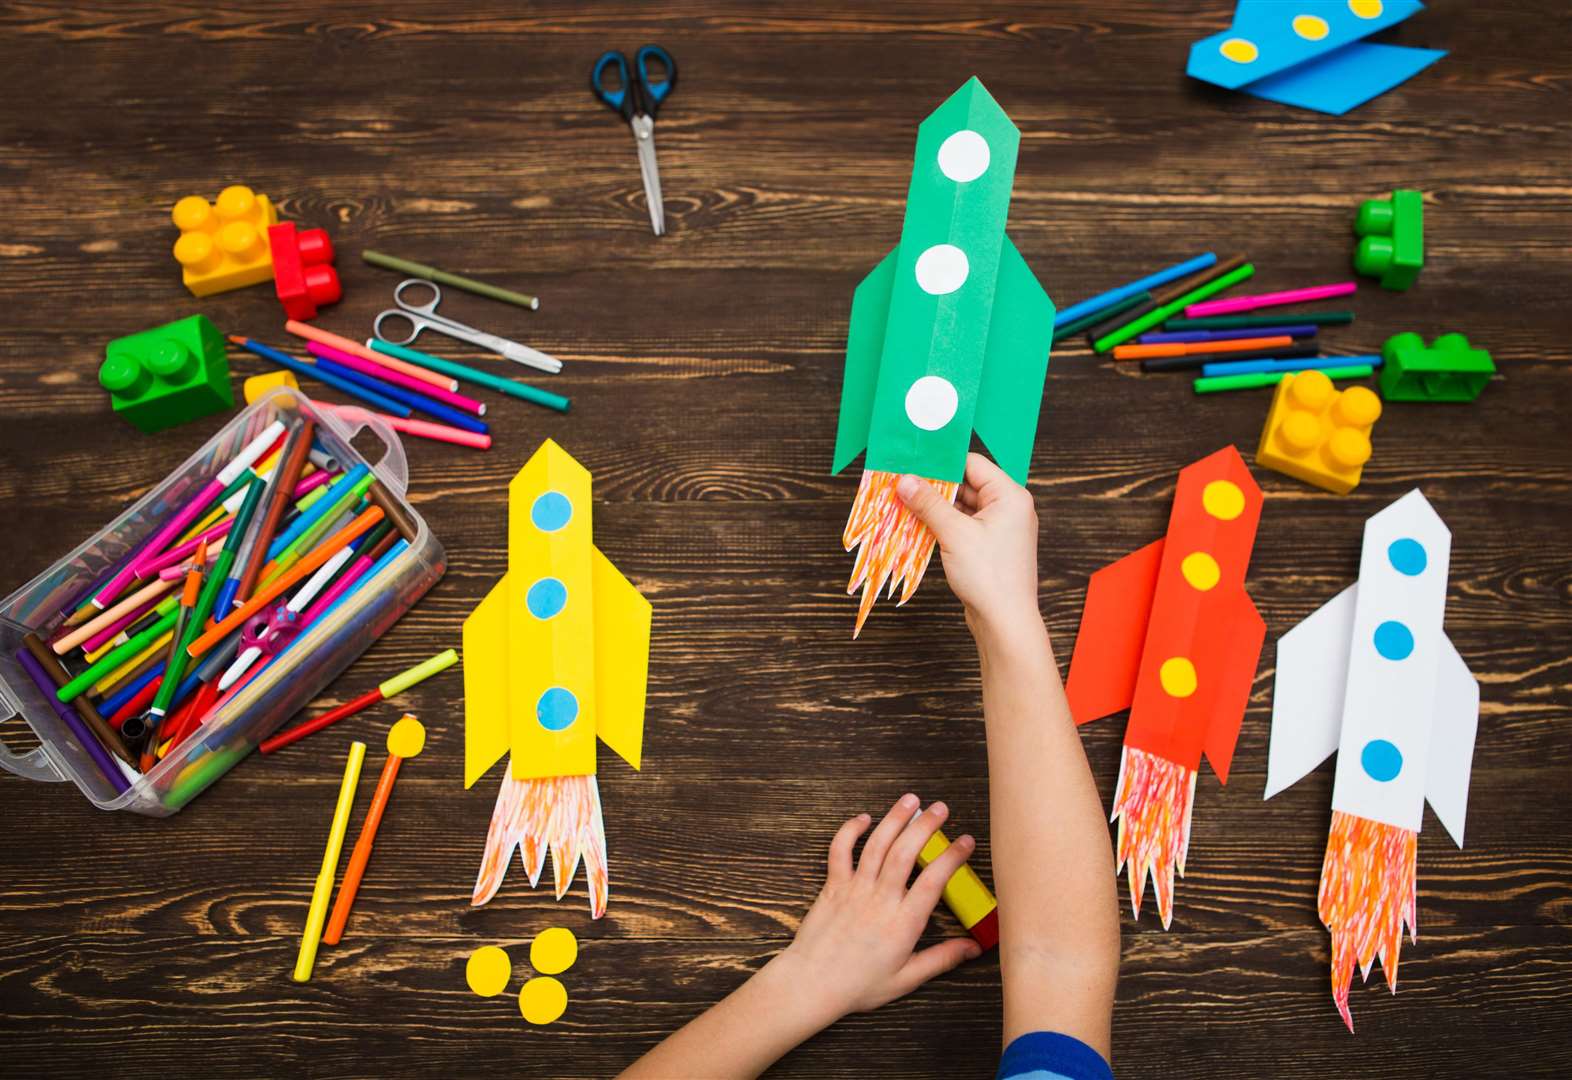 10 fun craft projects you can do with the kids